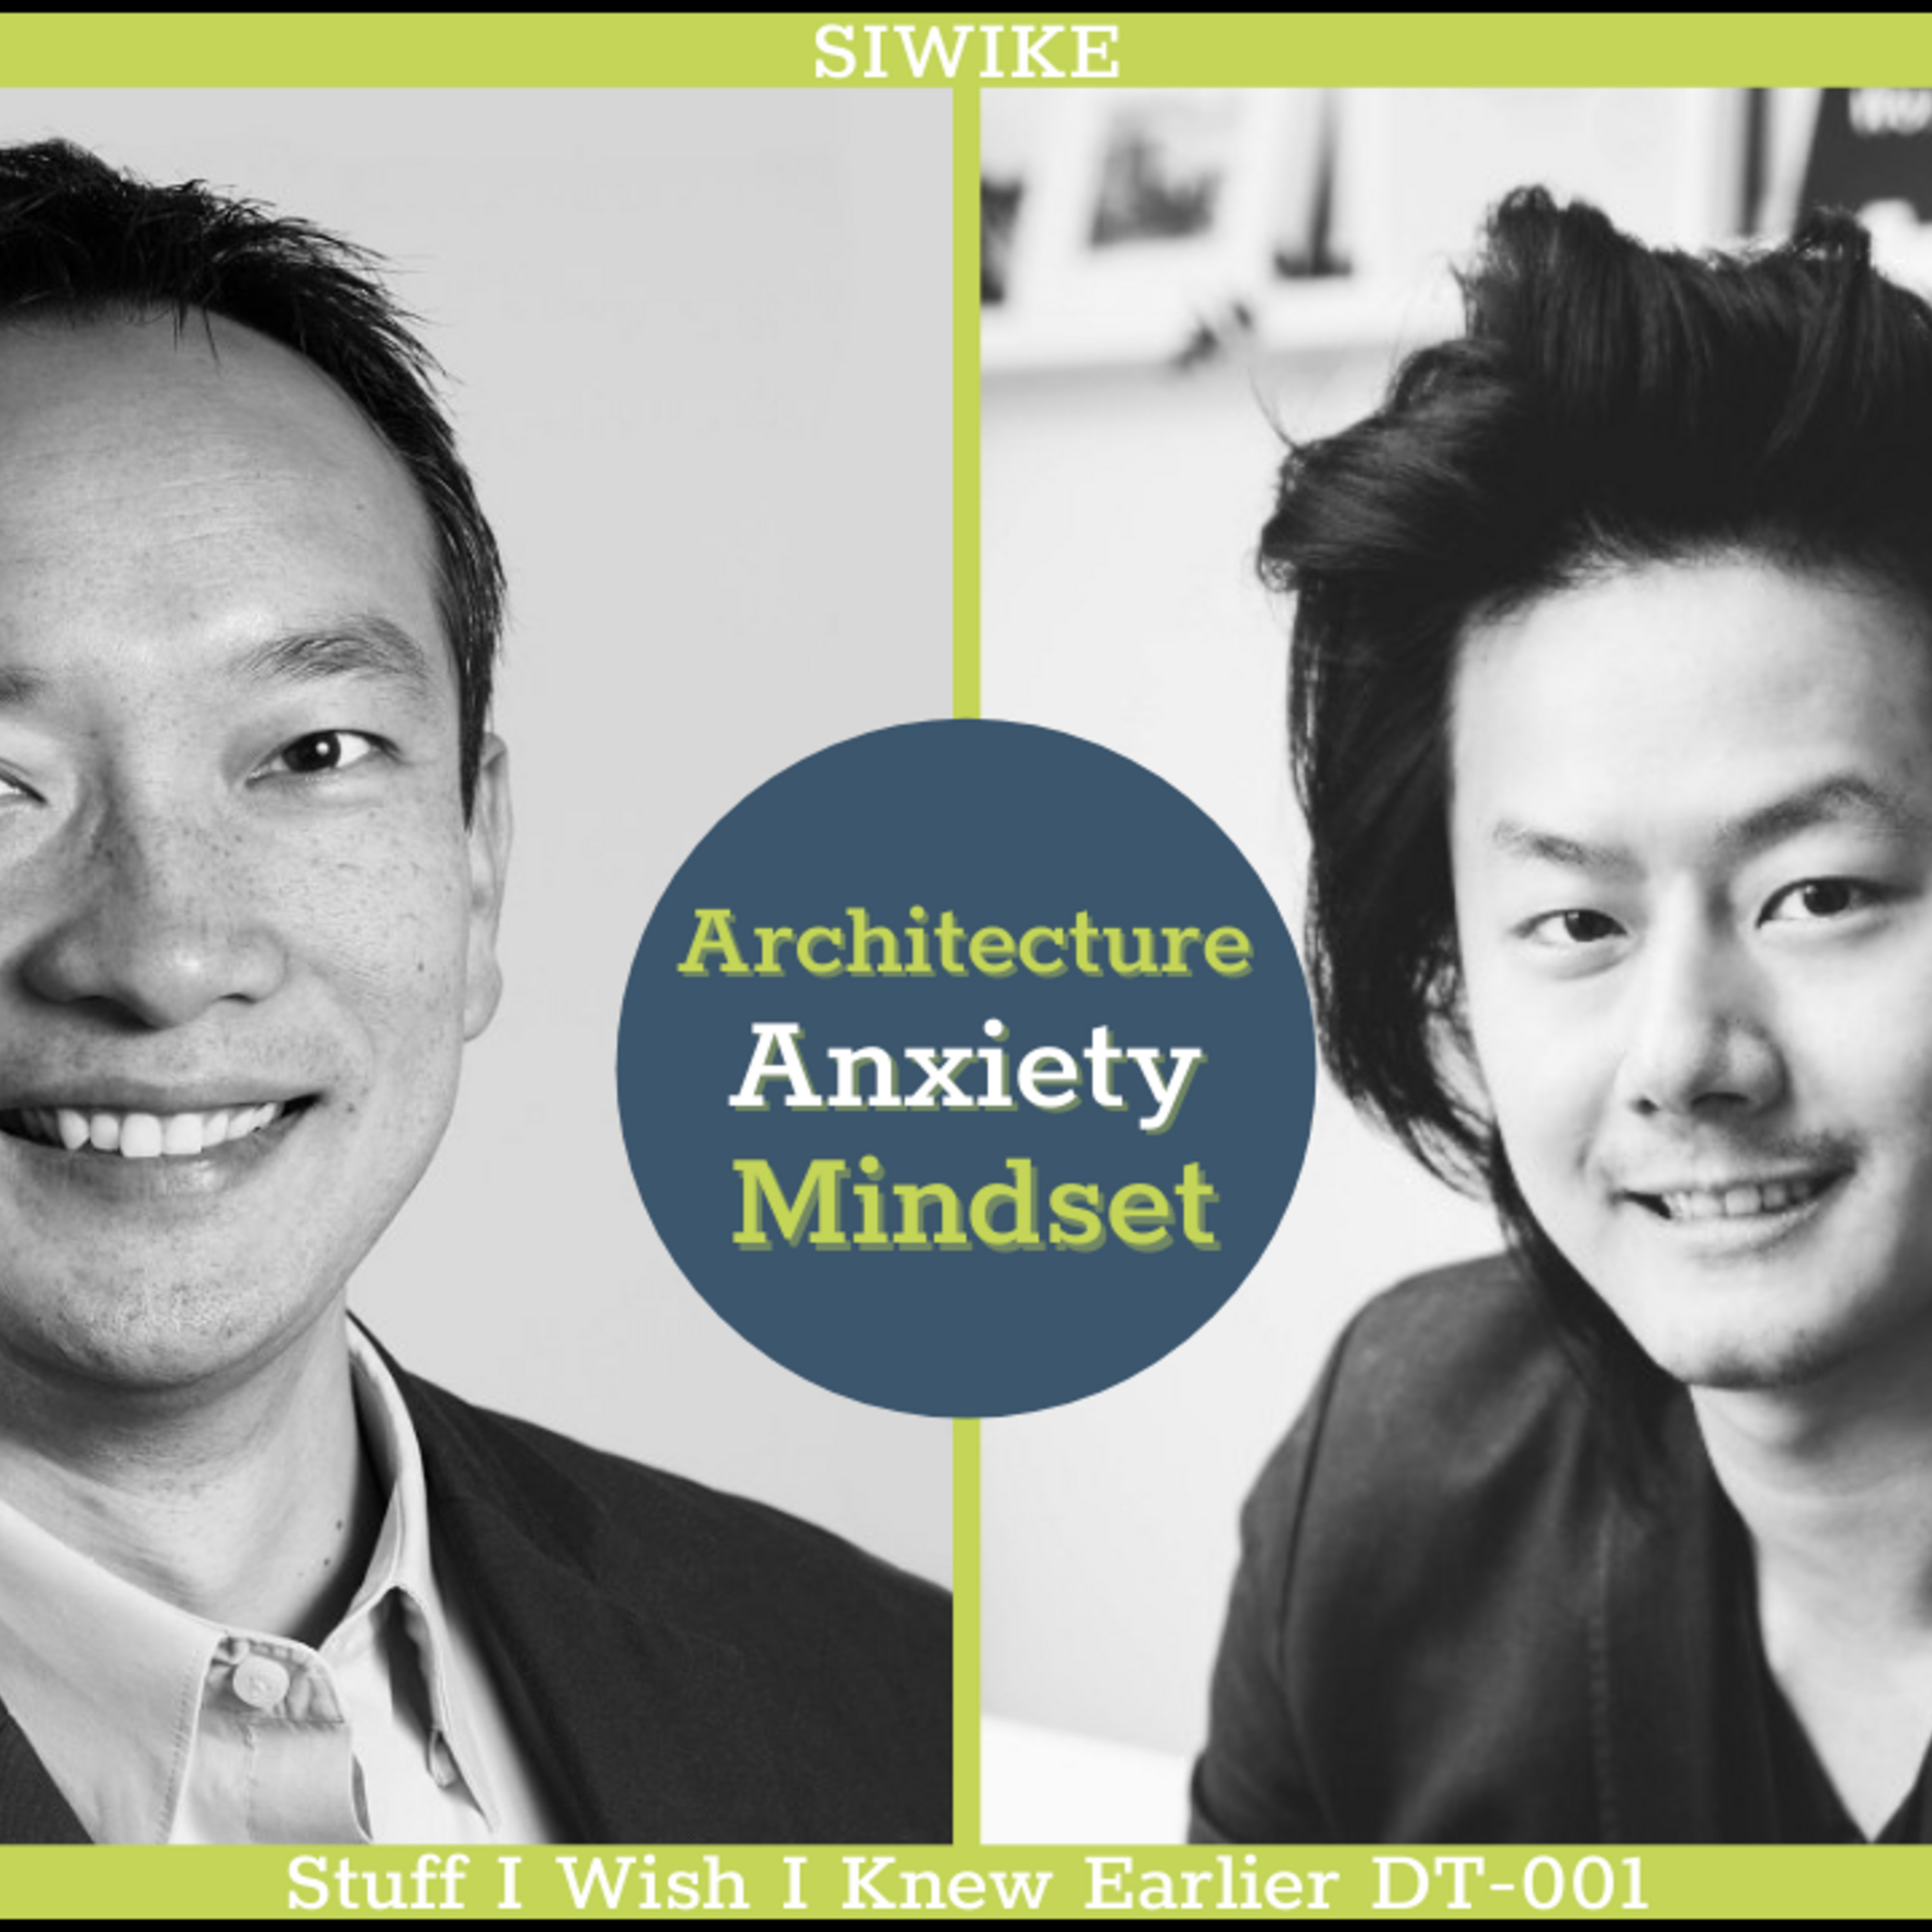 Architecture, Anxiety and Mindset - Danny Tseng DT-001 MENTOR CORNER